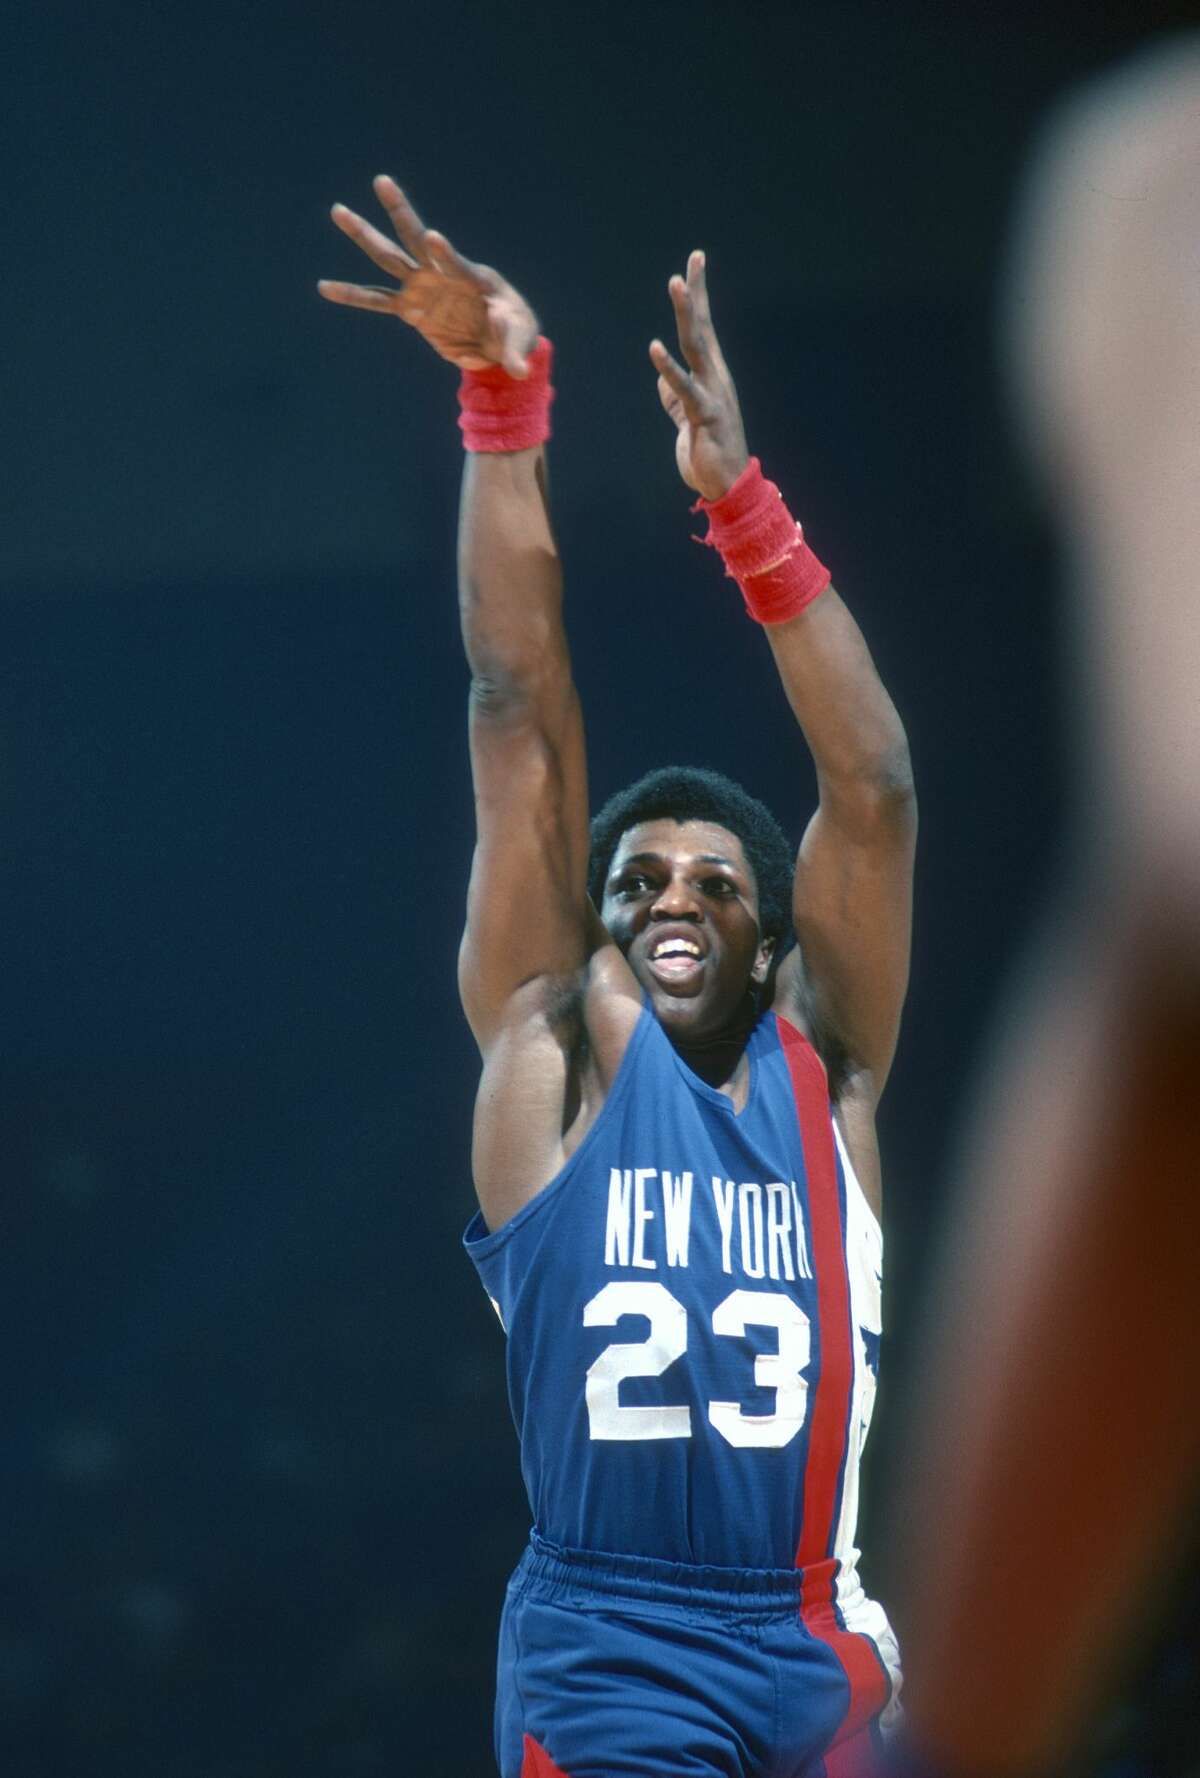 LANDOVER, MD - CIRCA 1978: John Williamson #23 of the New Jersey Nets shoots against the Washington Bullets during an NBA basketball game circa 1978 at the Capital Centre in Landover, Maryland. (Photo by Focus on Sport/Getty Images)